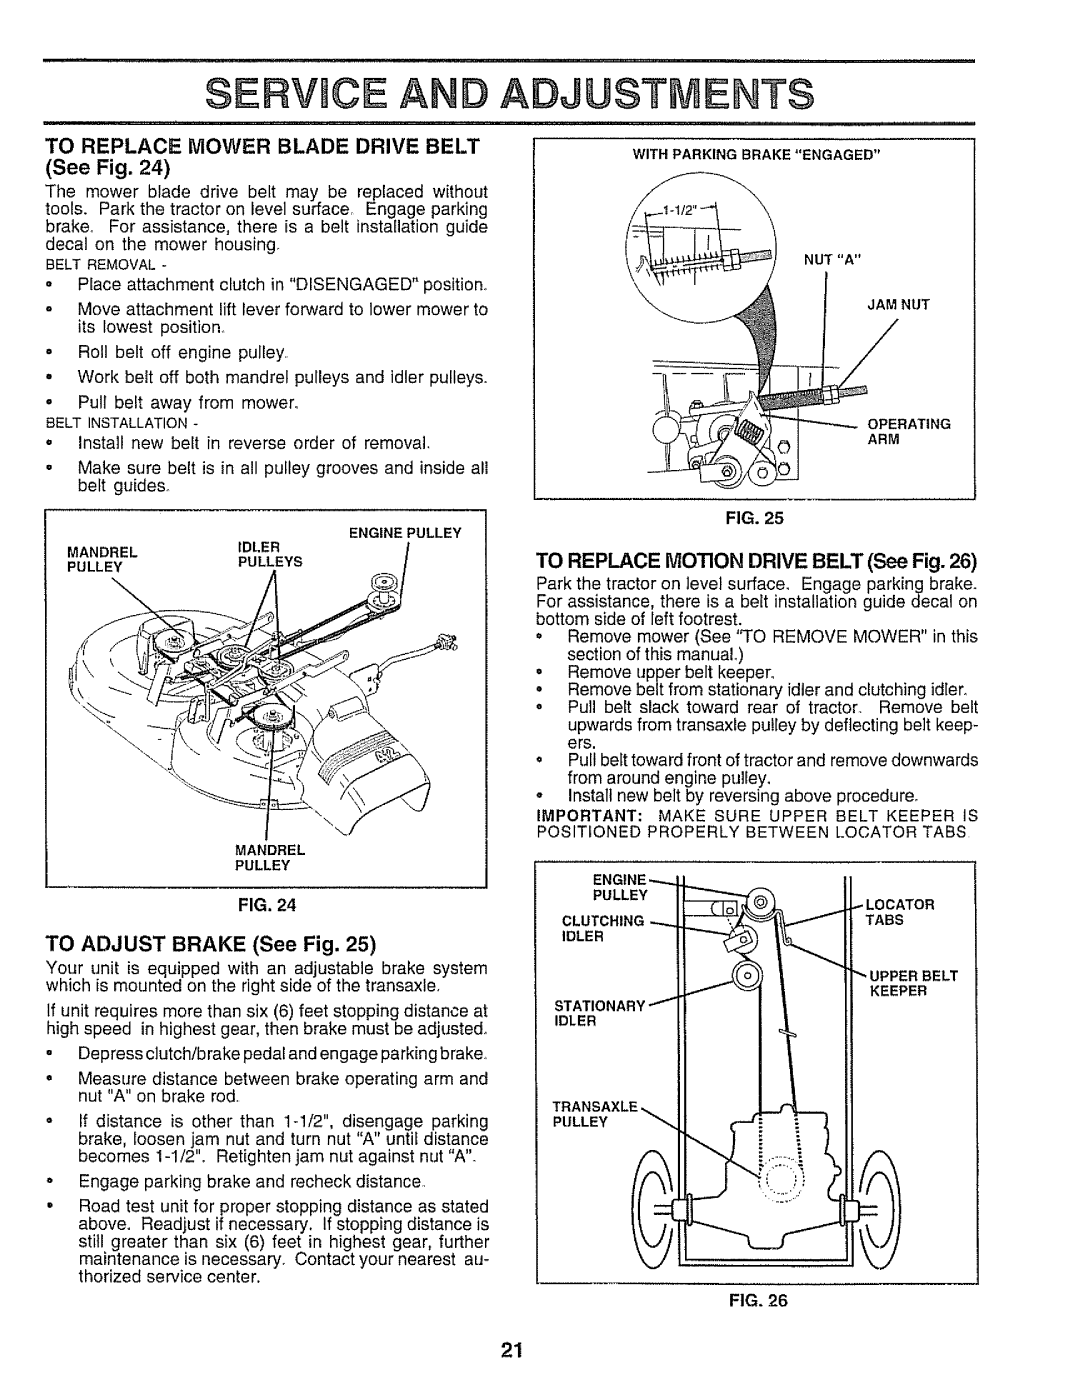 Sears 917.25545 To Replace Mower Blade Drive Belt, TO REPLACE MOTION DRIVE BELT See Fig, FIG. TO ADJUST BRAKE See Fig 